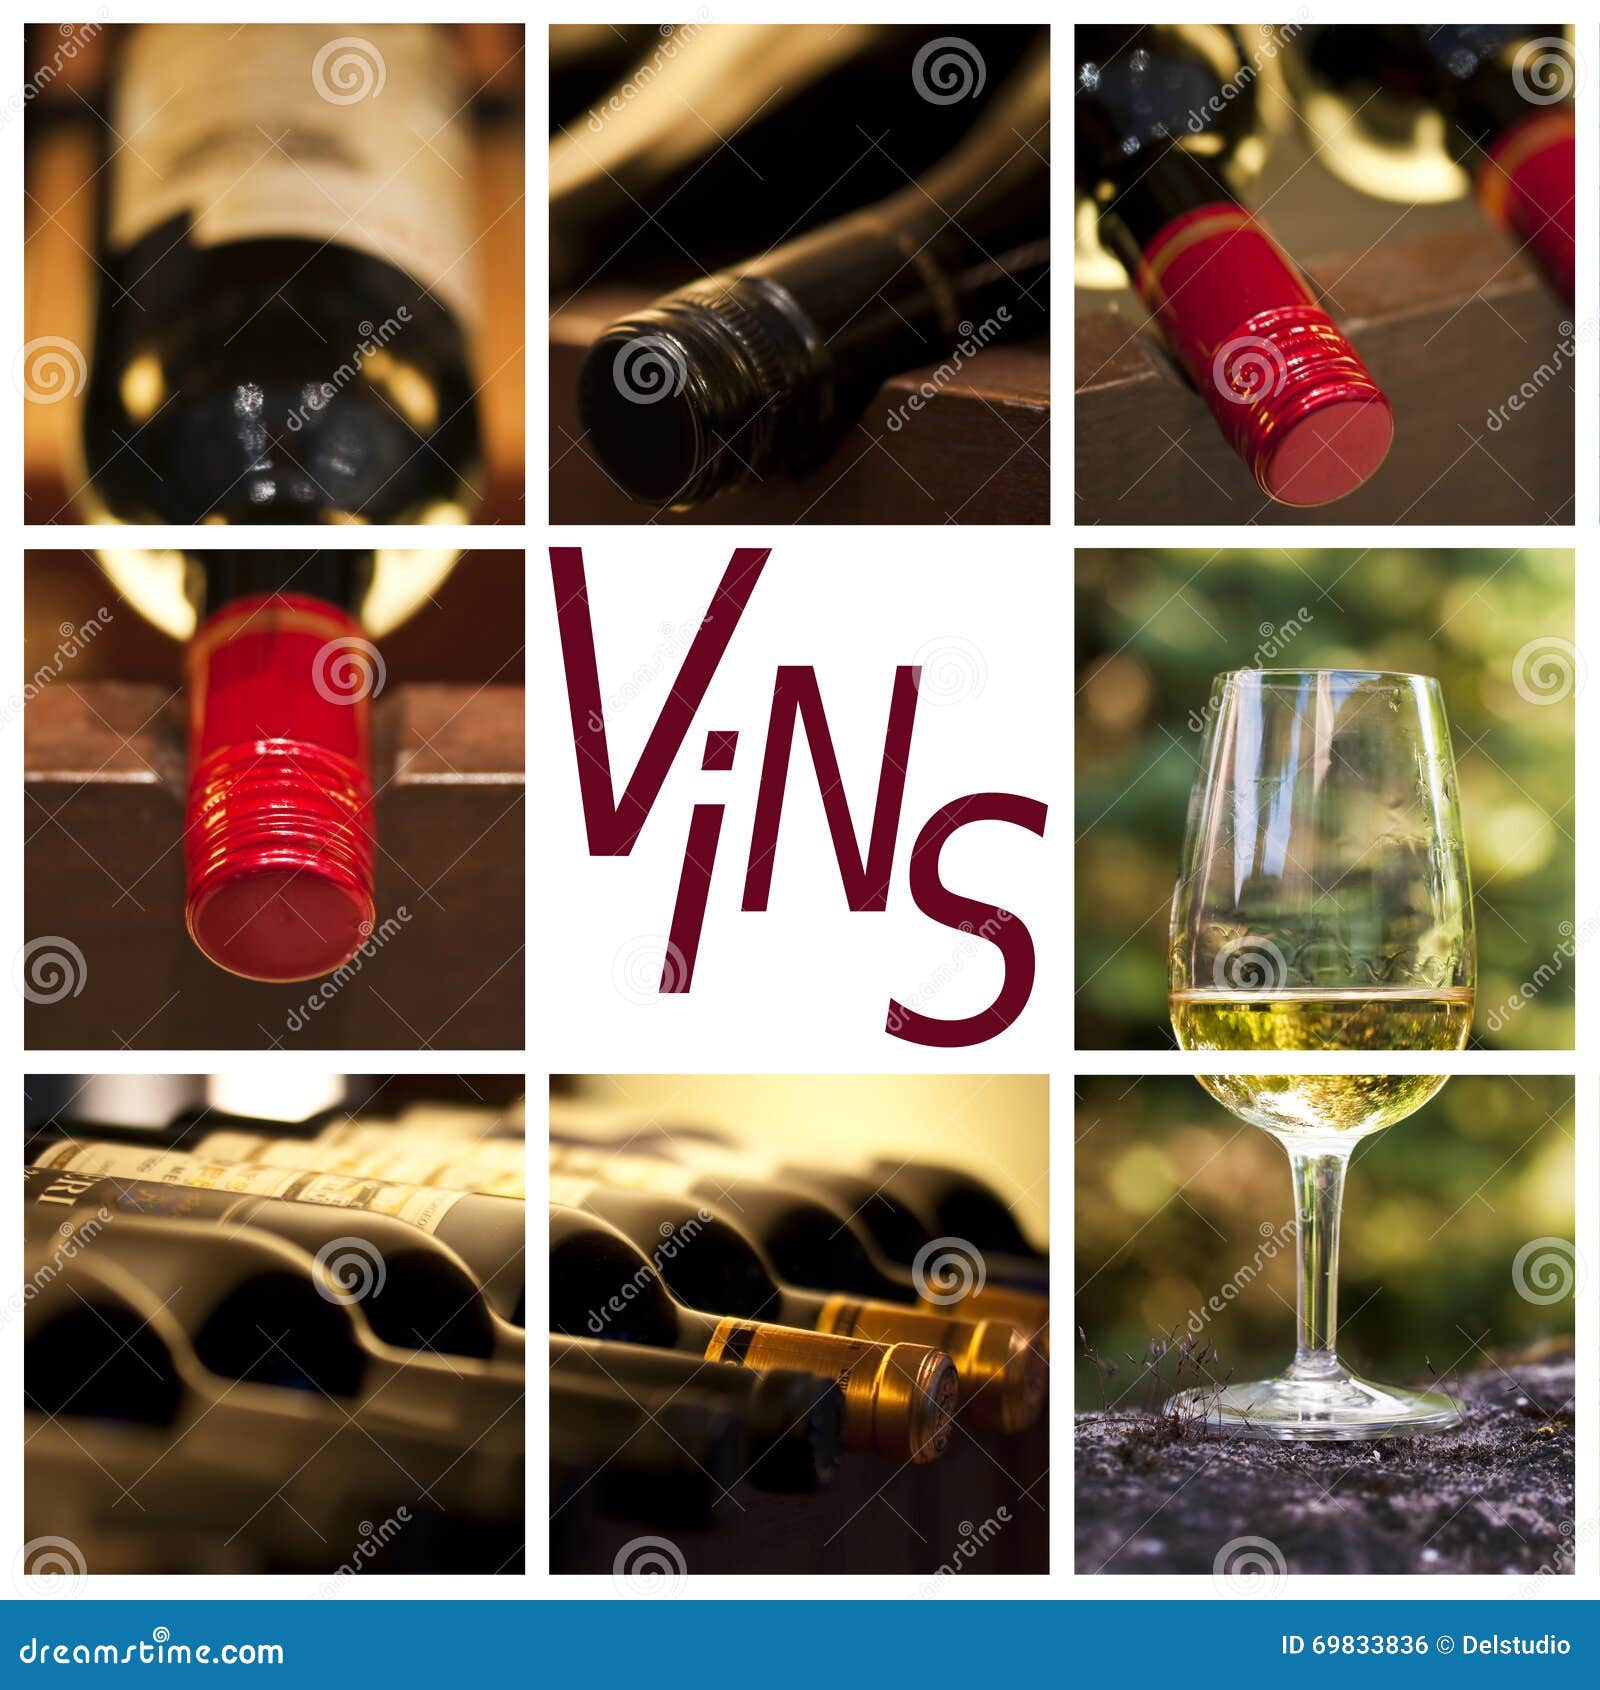 oenology and wine concept collage, word vins